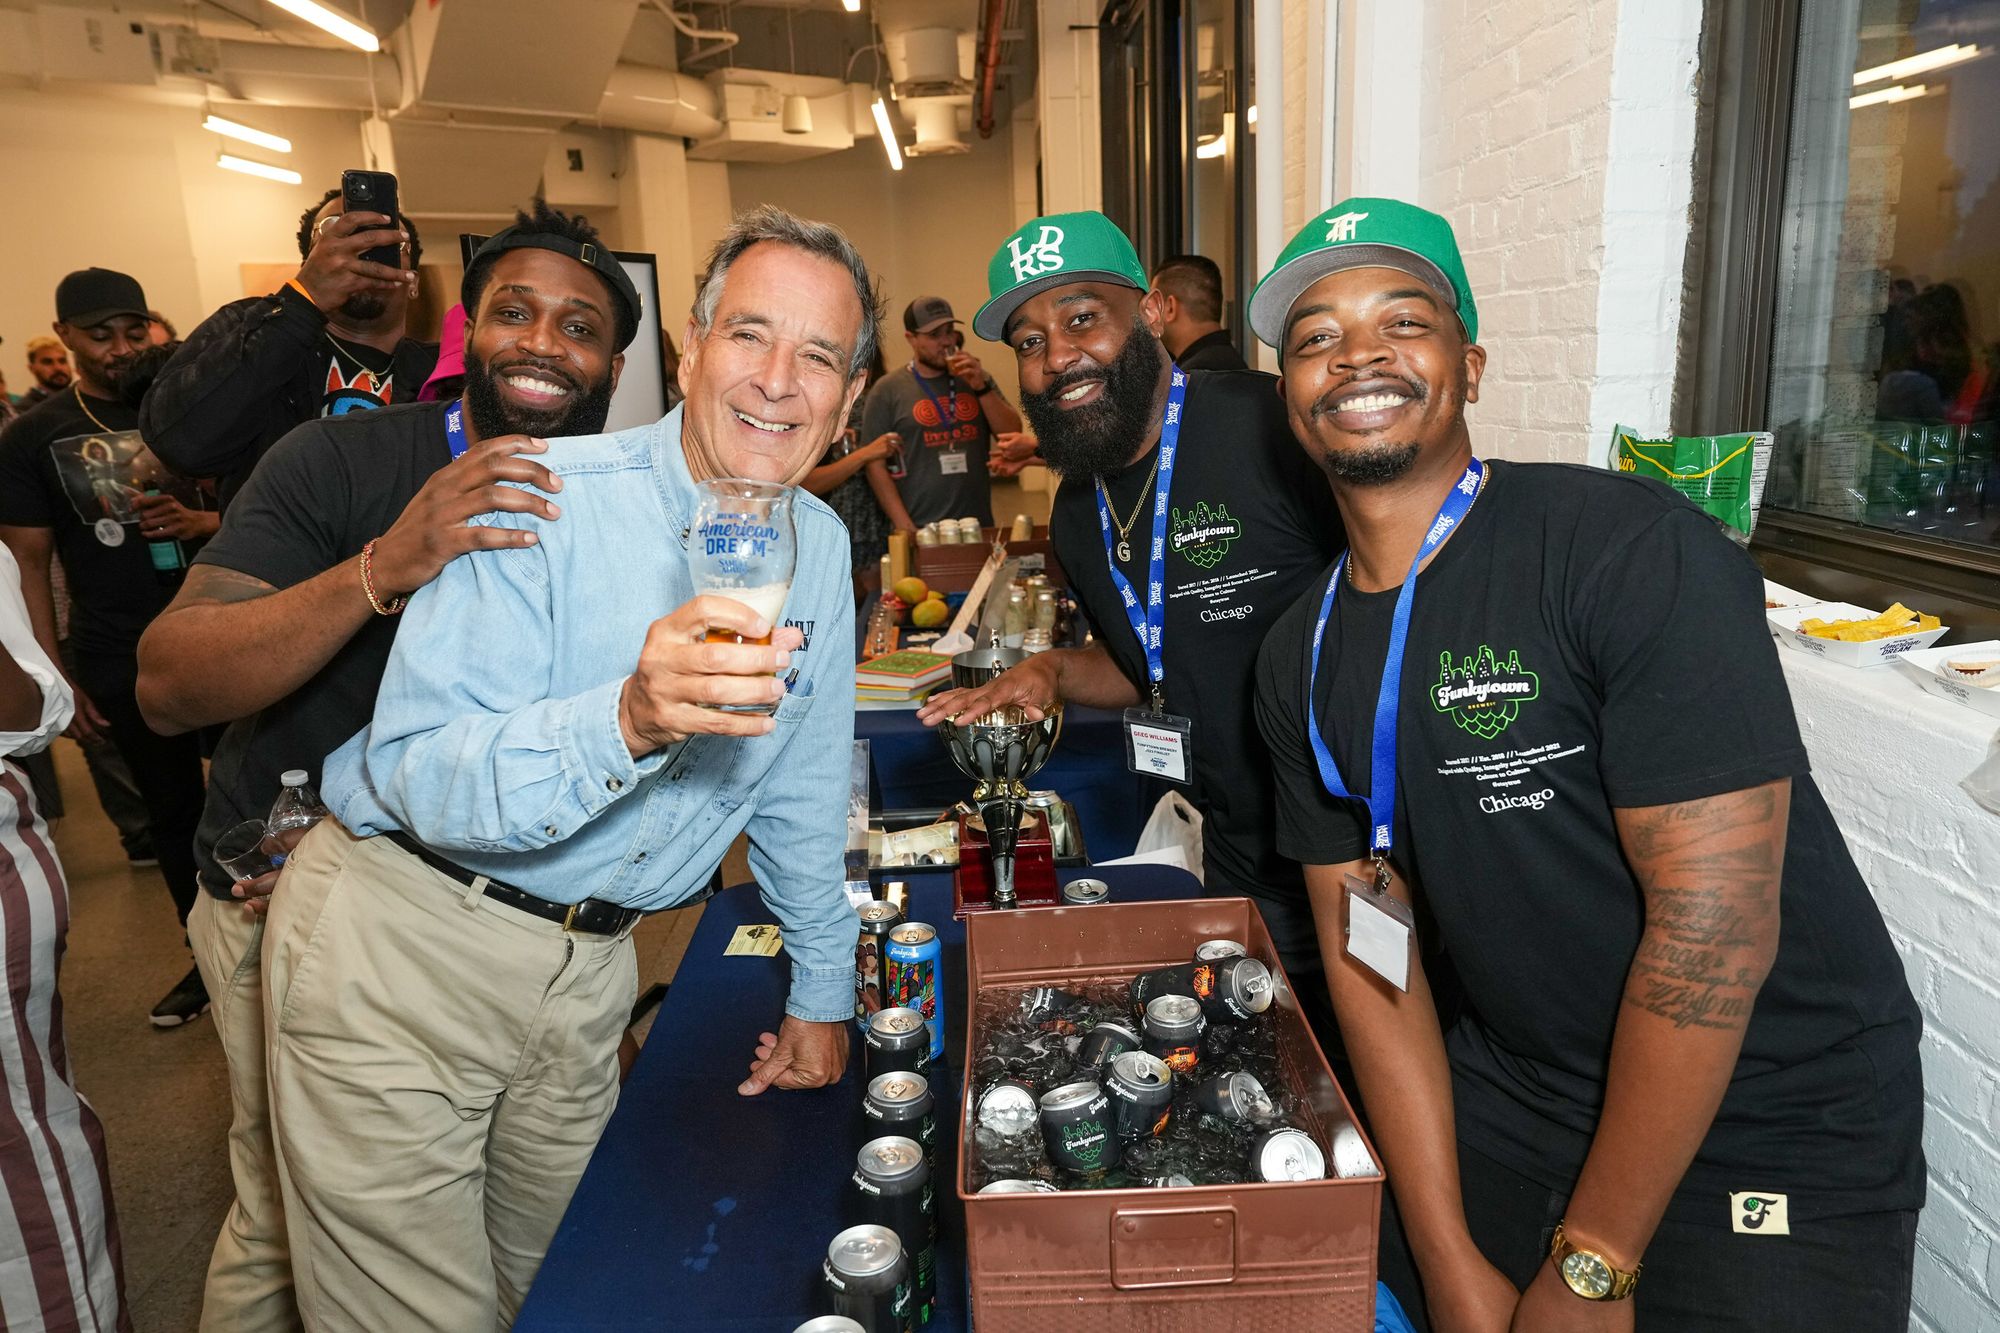 Chicago's Funkytown Brewery announced winner of Samuel Adams Brewing’s 12th annual brewing event